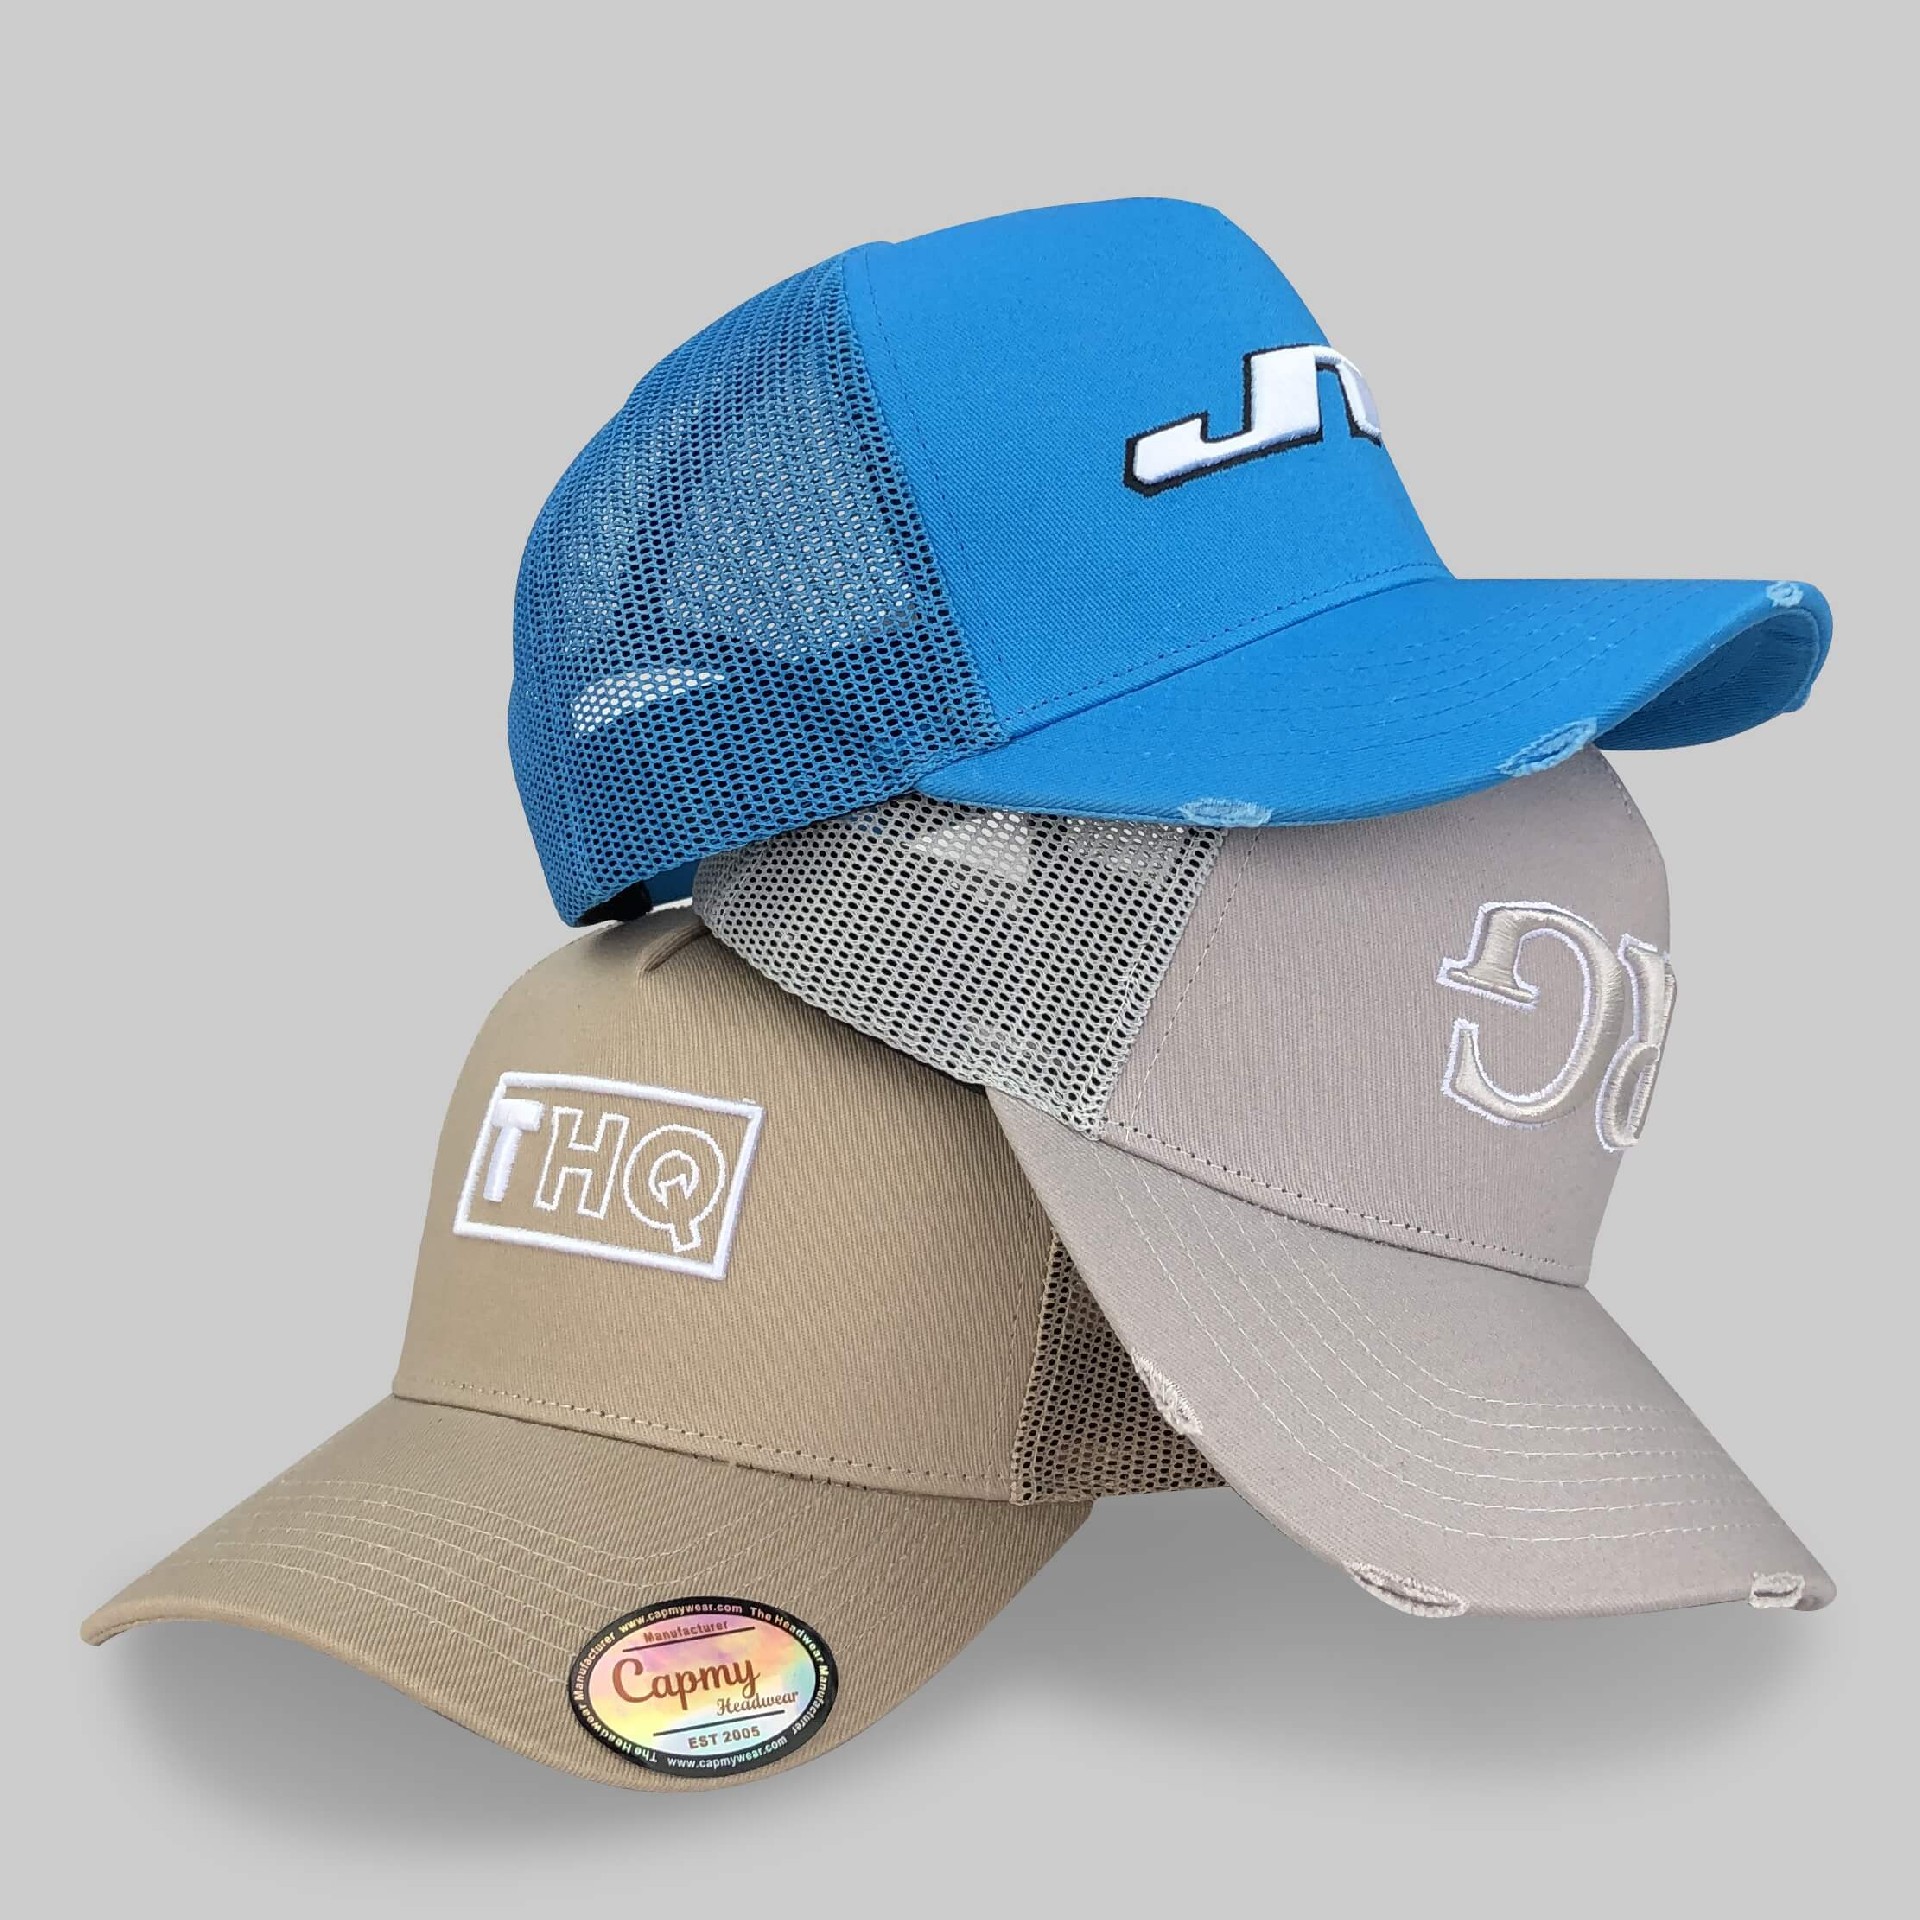 CMC-3130(Wholesale Distressed Trucker Hats 3D Embroidered Vintage Rip Mesh Baseball Caps)